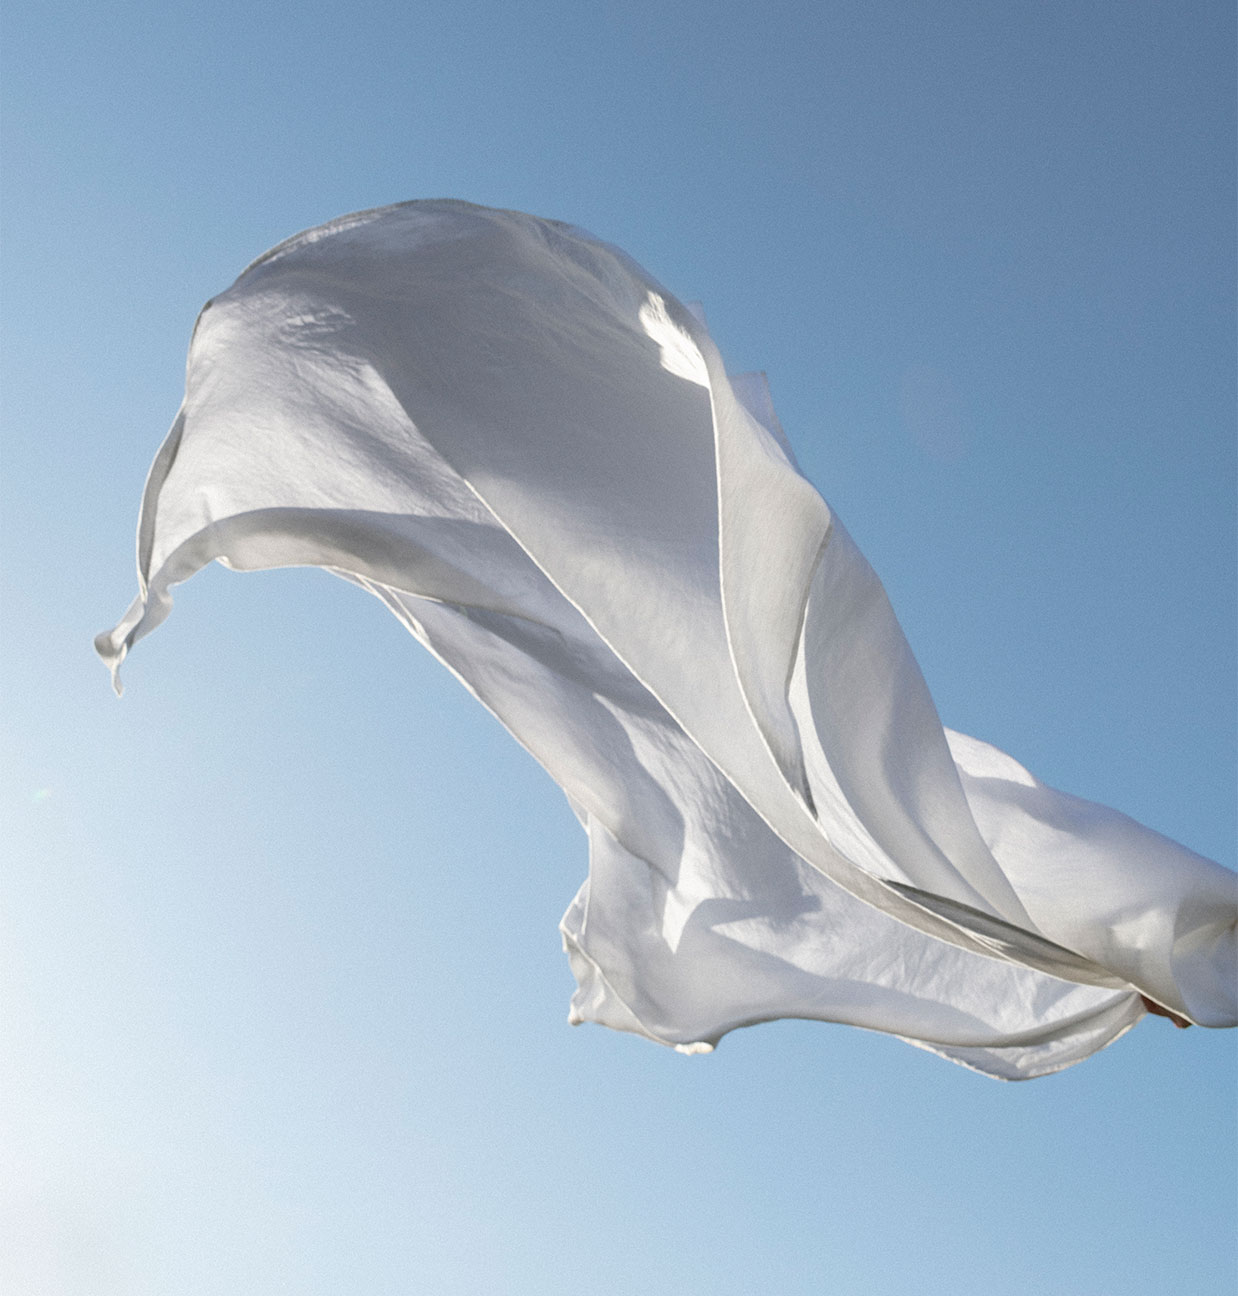 A white sheet blows in the wind agains the backdrop of a clear blue sky.